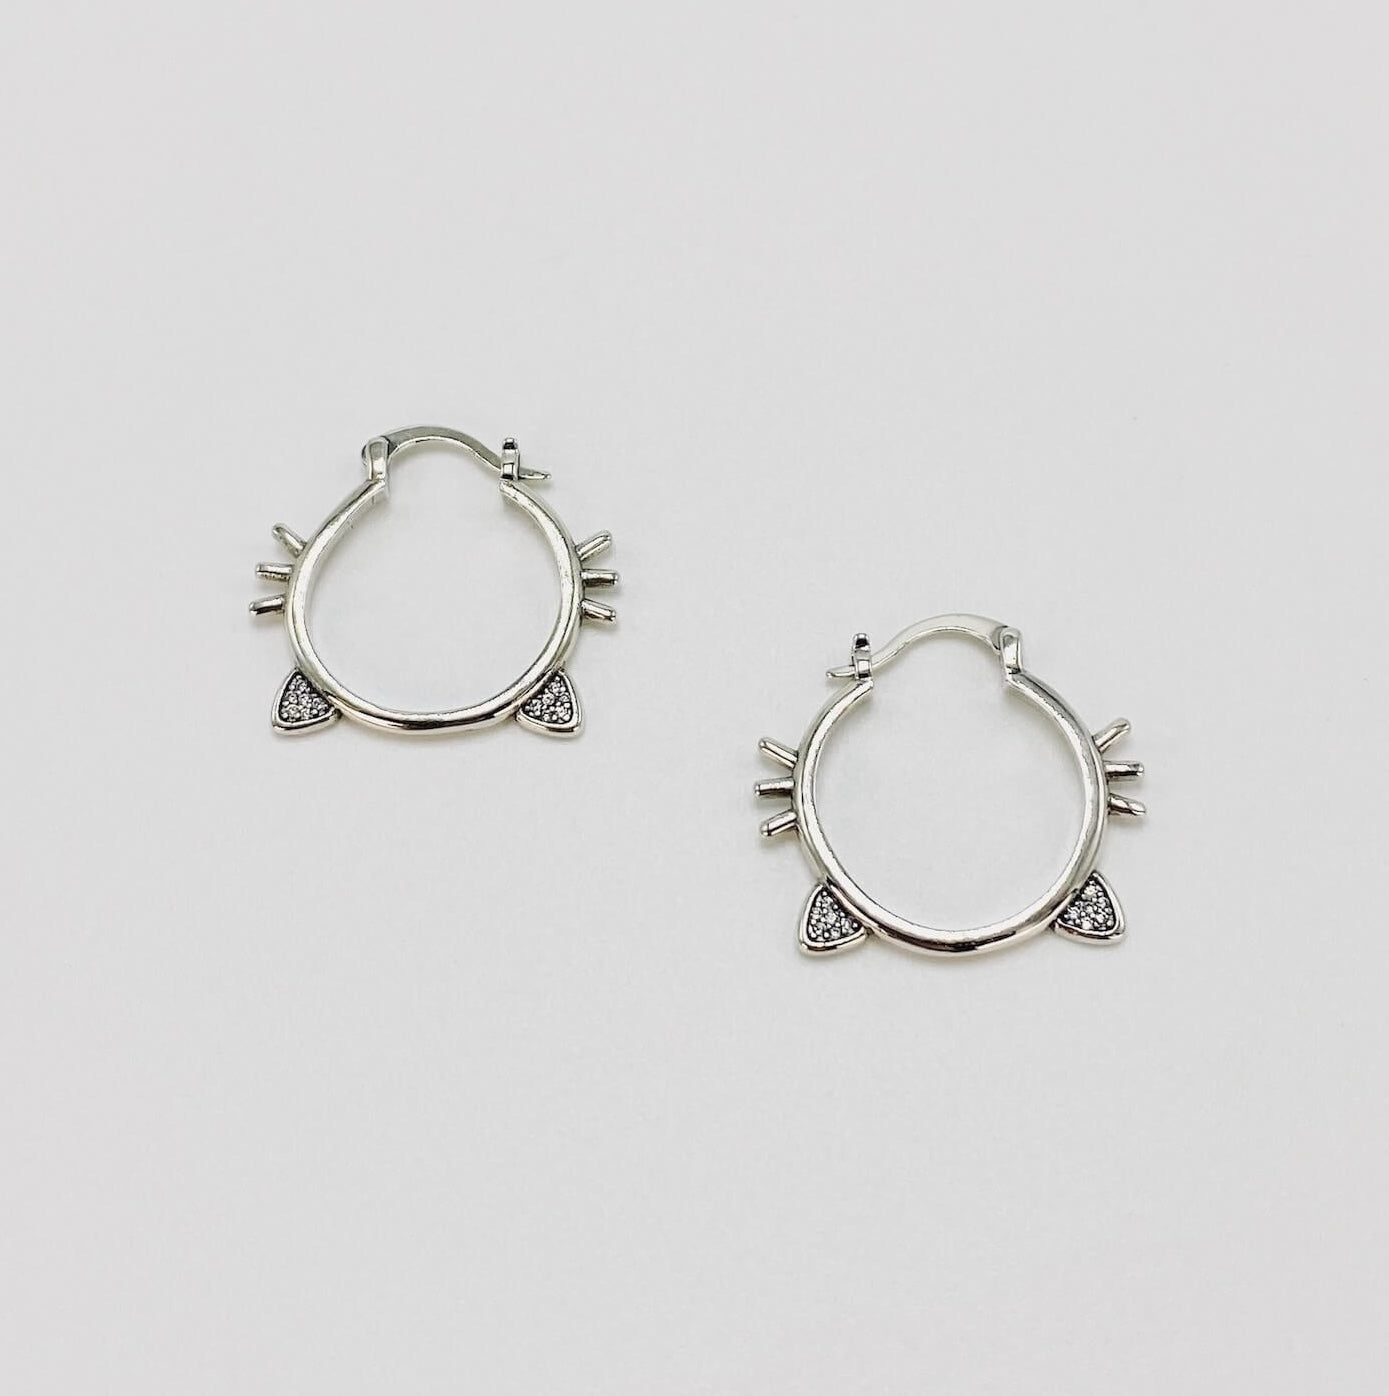 Sterling silver hoop earrings with cat ears and whiskers.